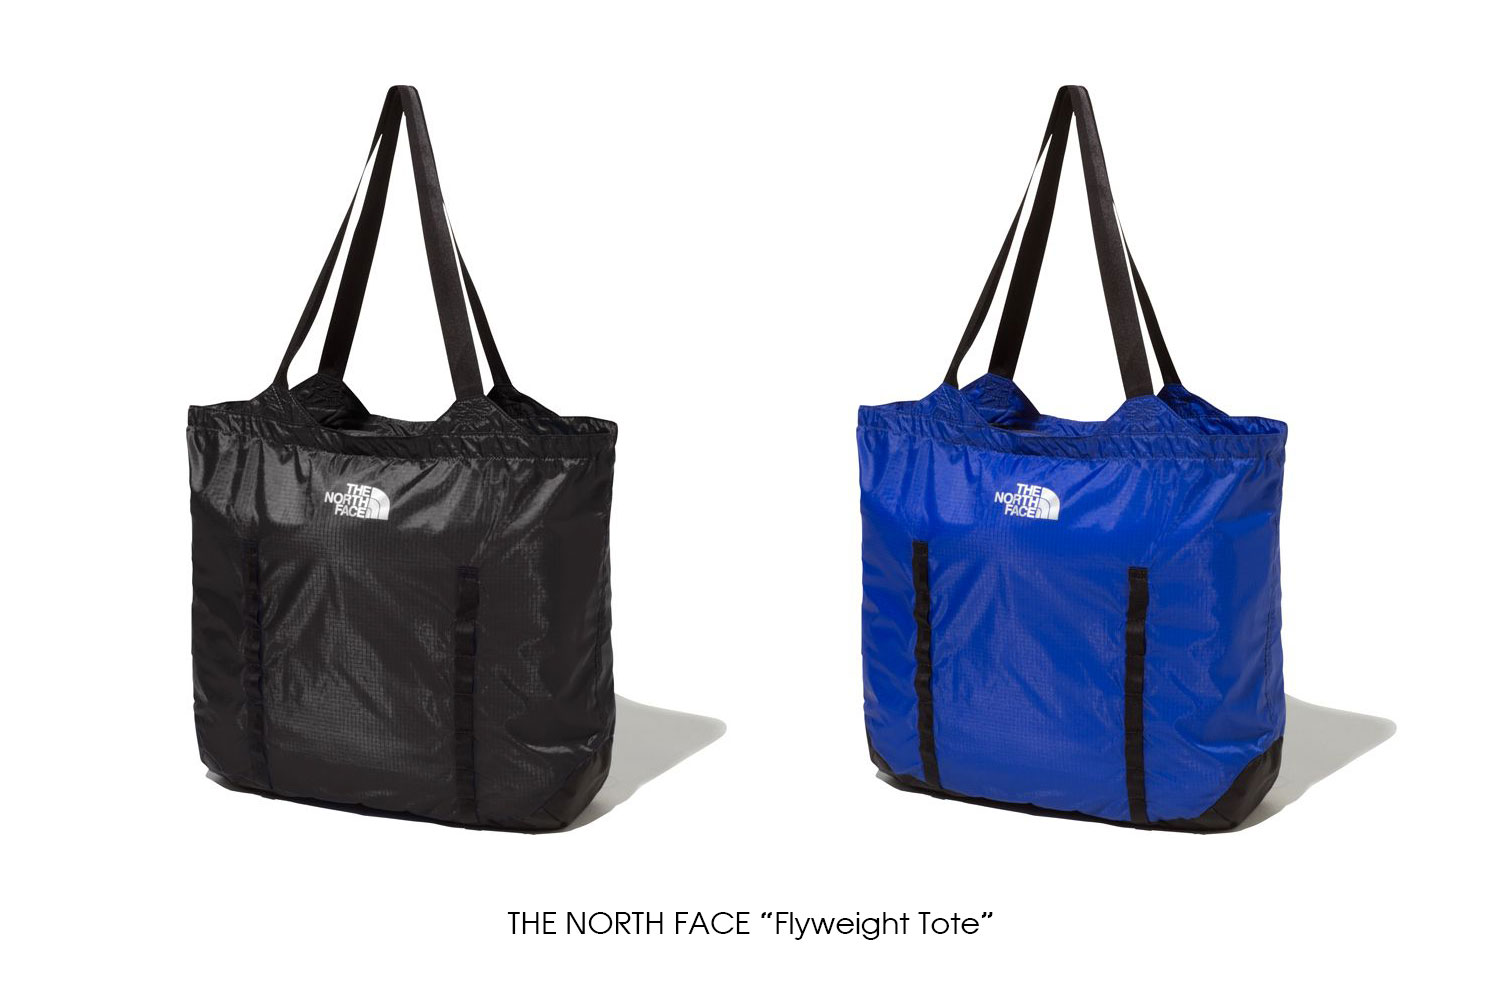 THE NORTH FACE "Flyweight Tote"